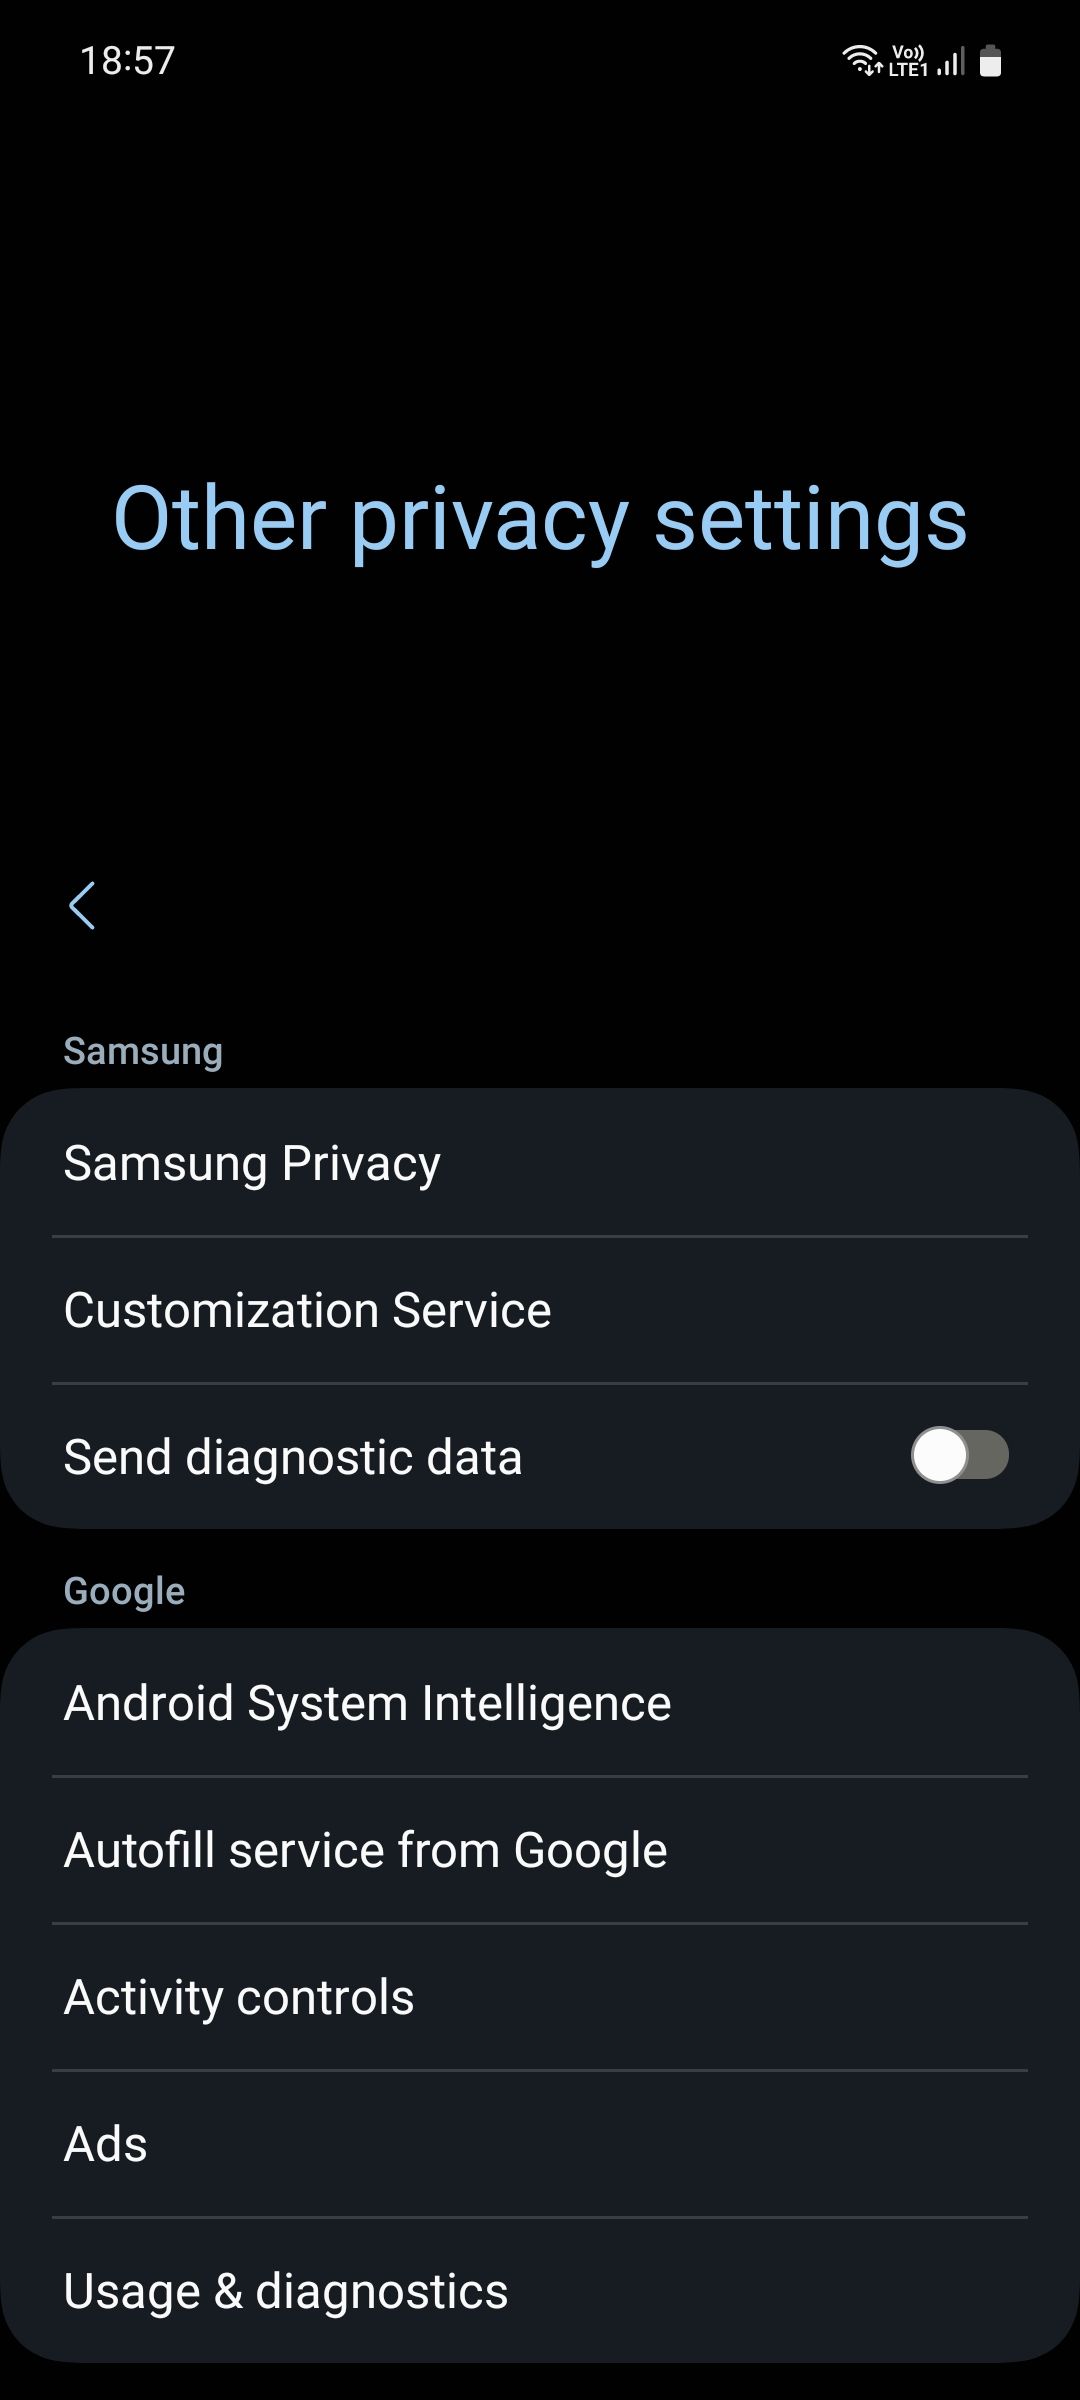 Samsung Other privacy settings menu